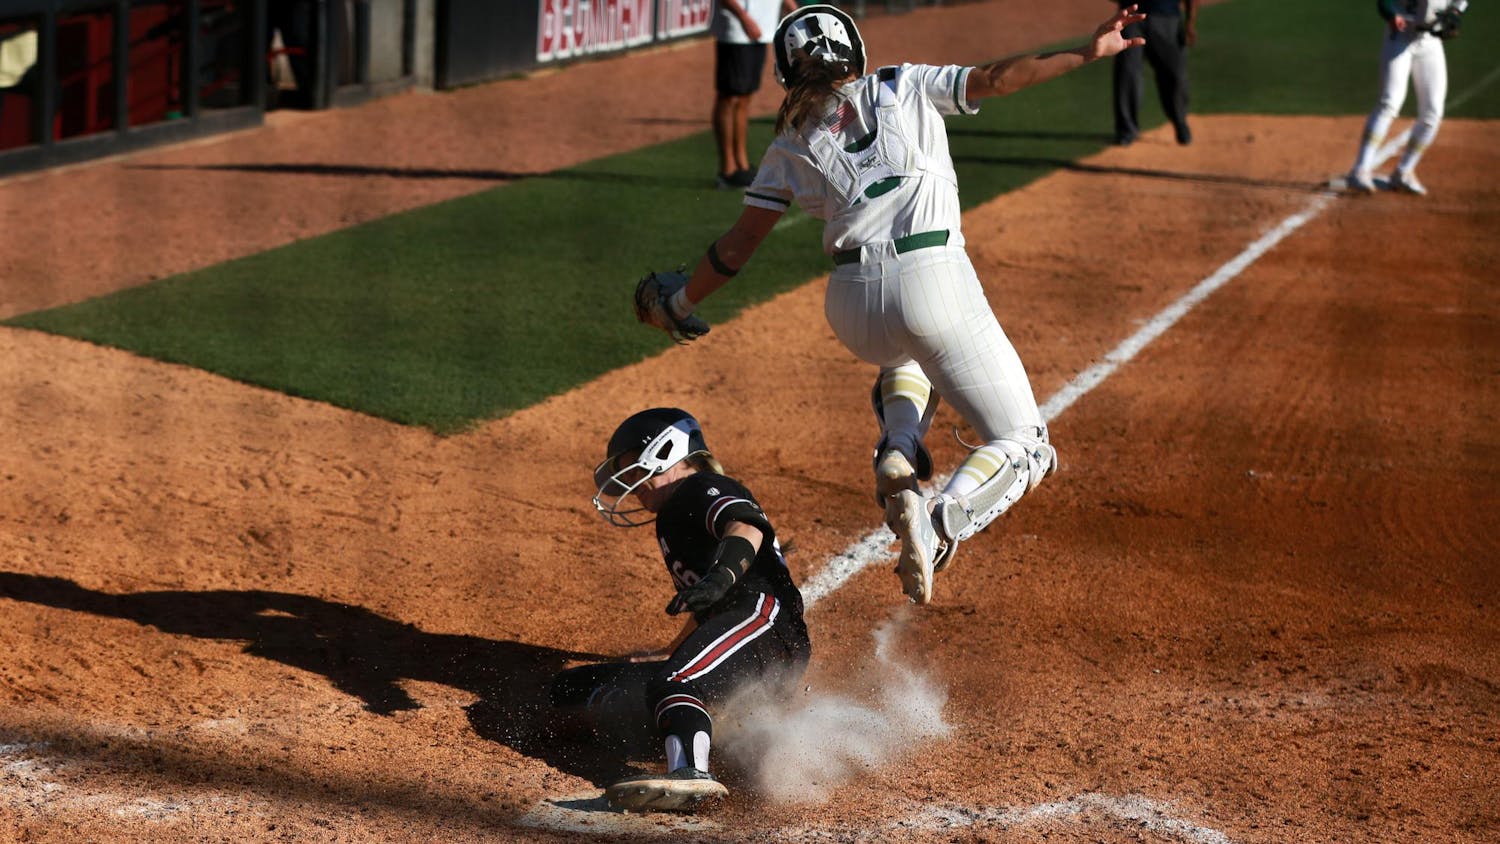 Senior infielder Riley Blampied slides onto home plate during South Carolina's matchup against UNC Charlotte at Beckham Field on Feb. 25, 2024. Blampied scored one run during the Gamecocks’ 7-2 win.